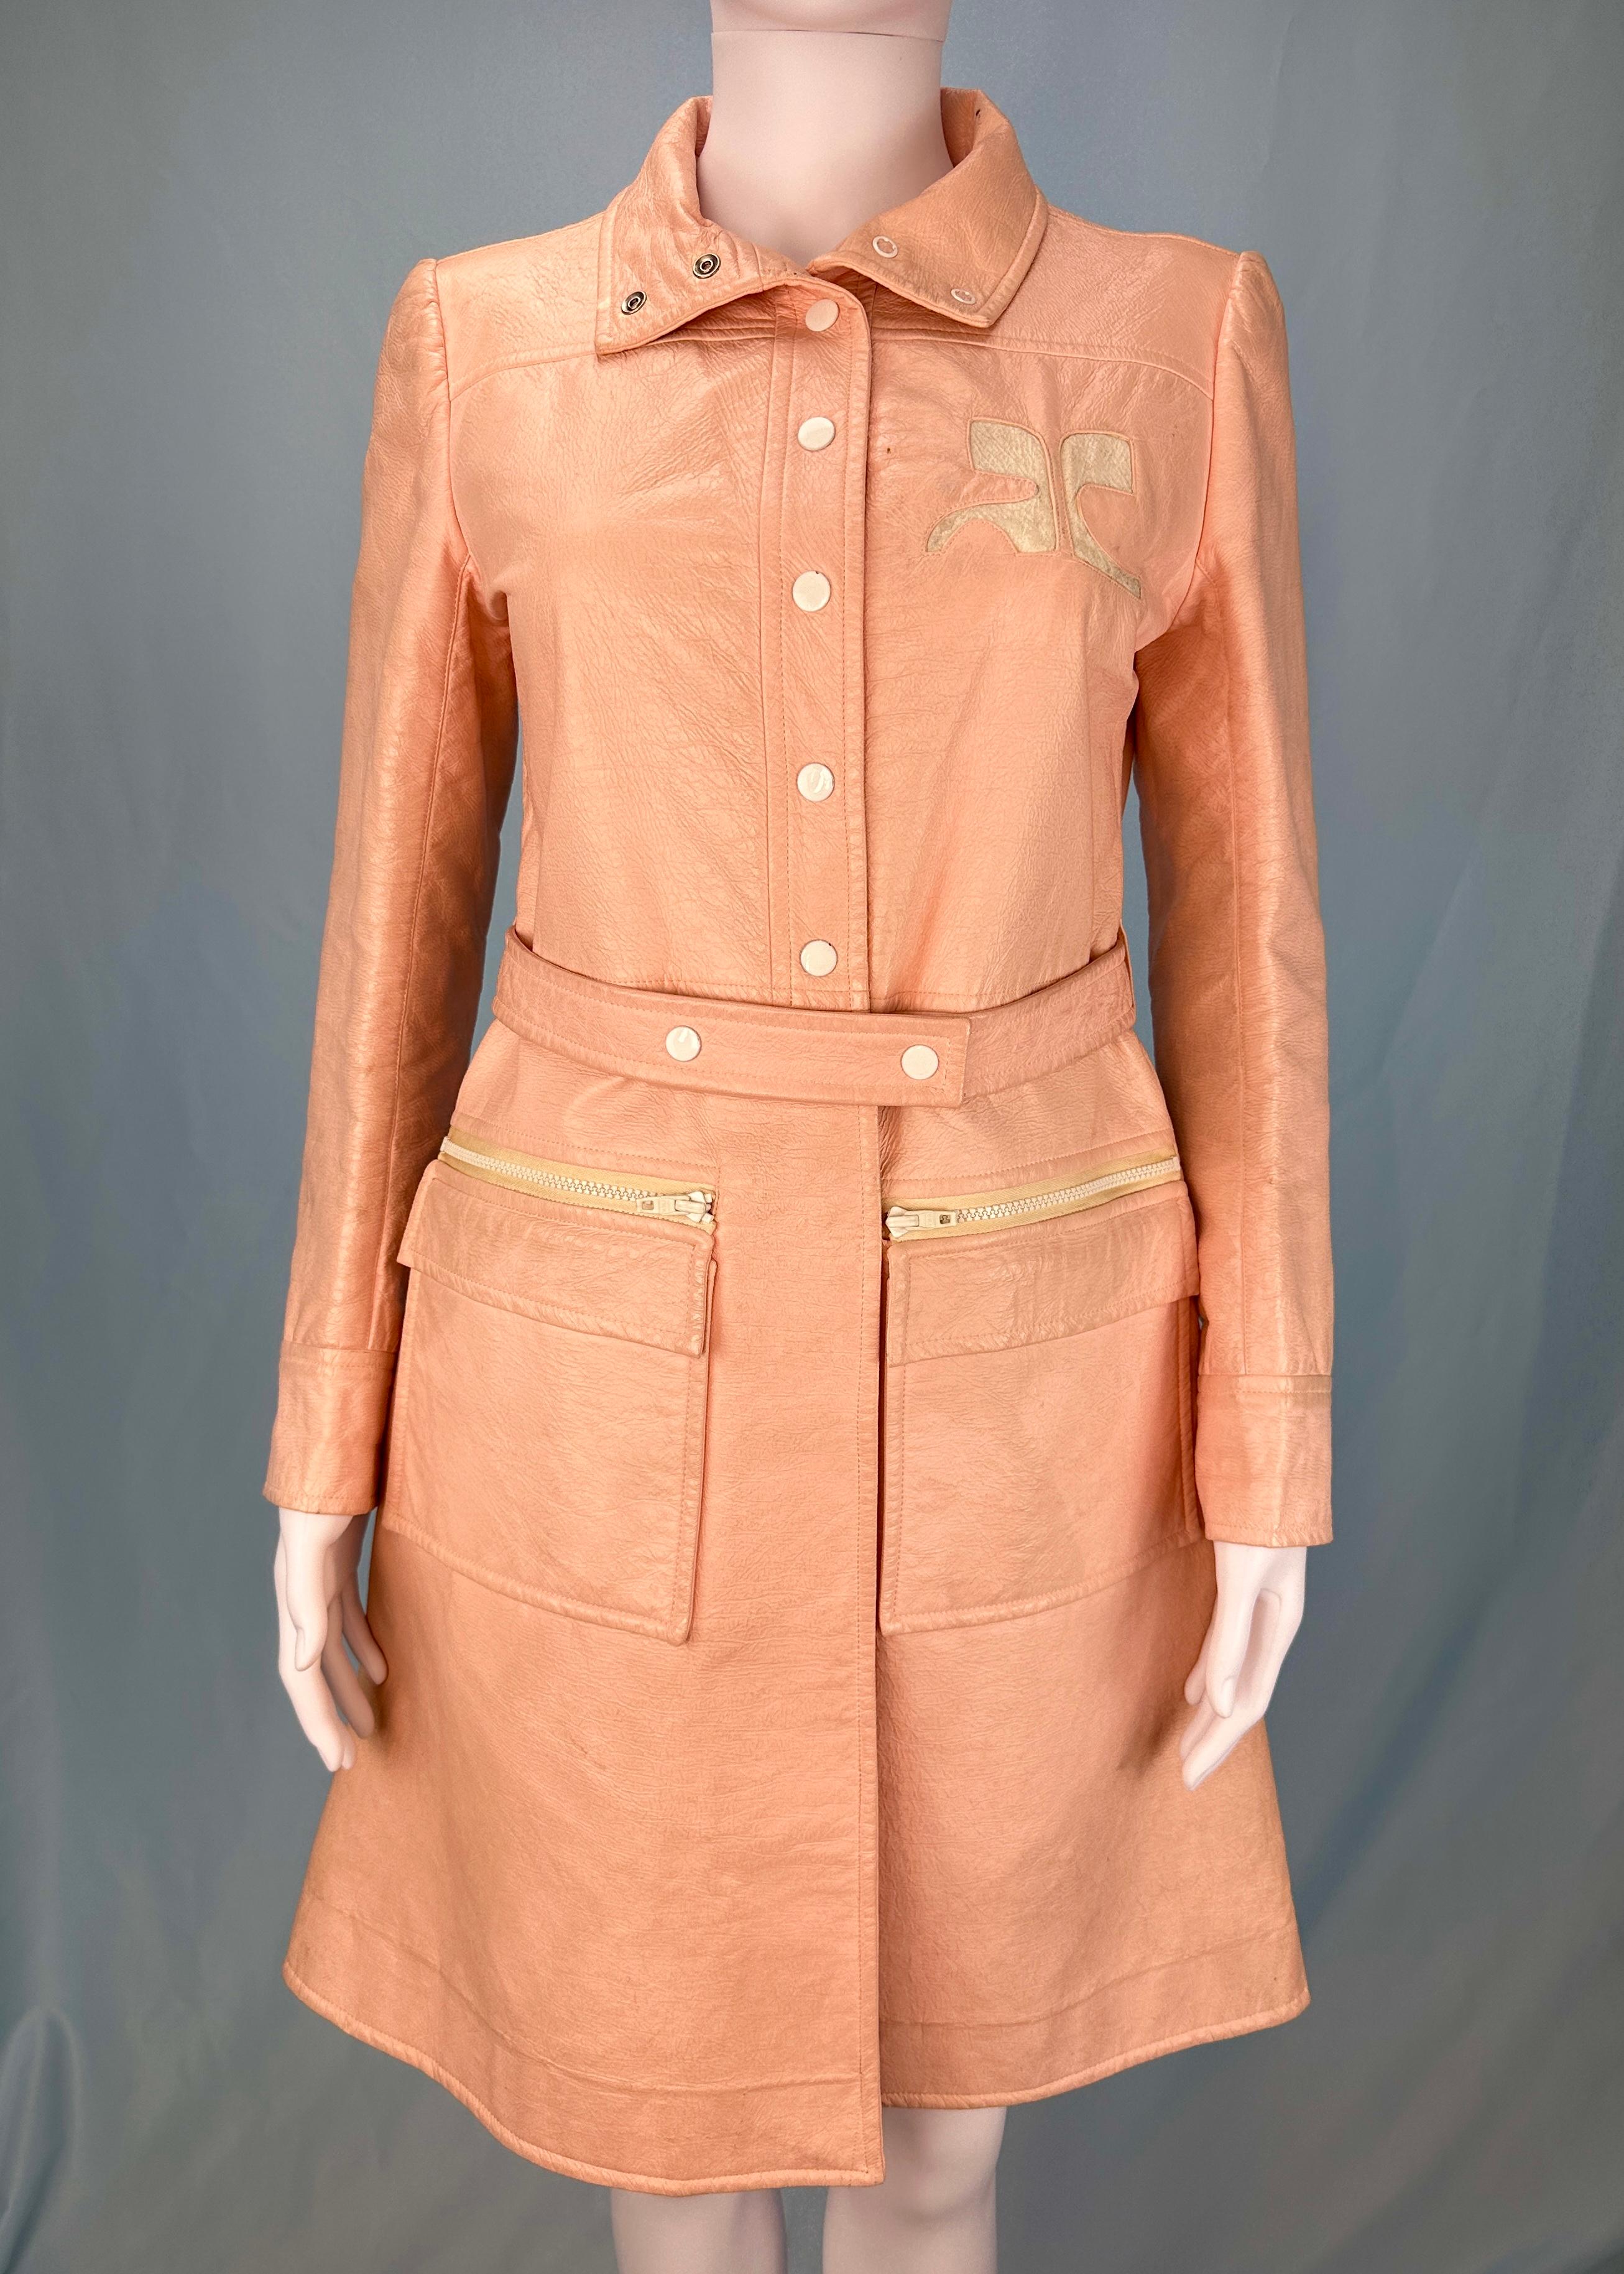 Courrèges 1960’s Nylon Pink Peach Trench Jacket In Fair Condition For Sale In Hertfordshire, GB